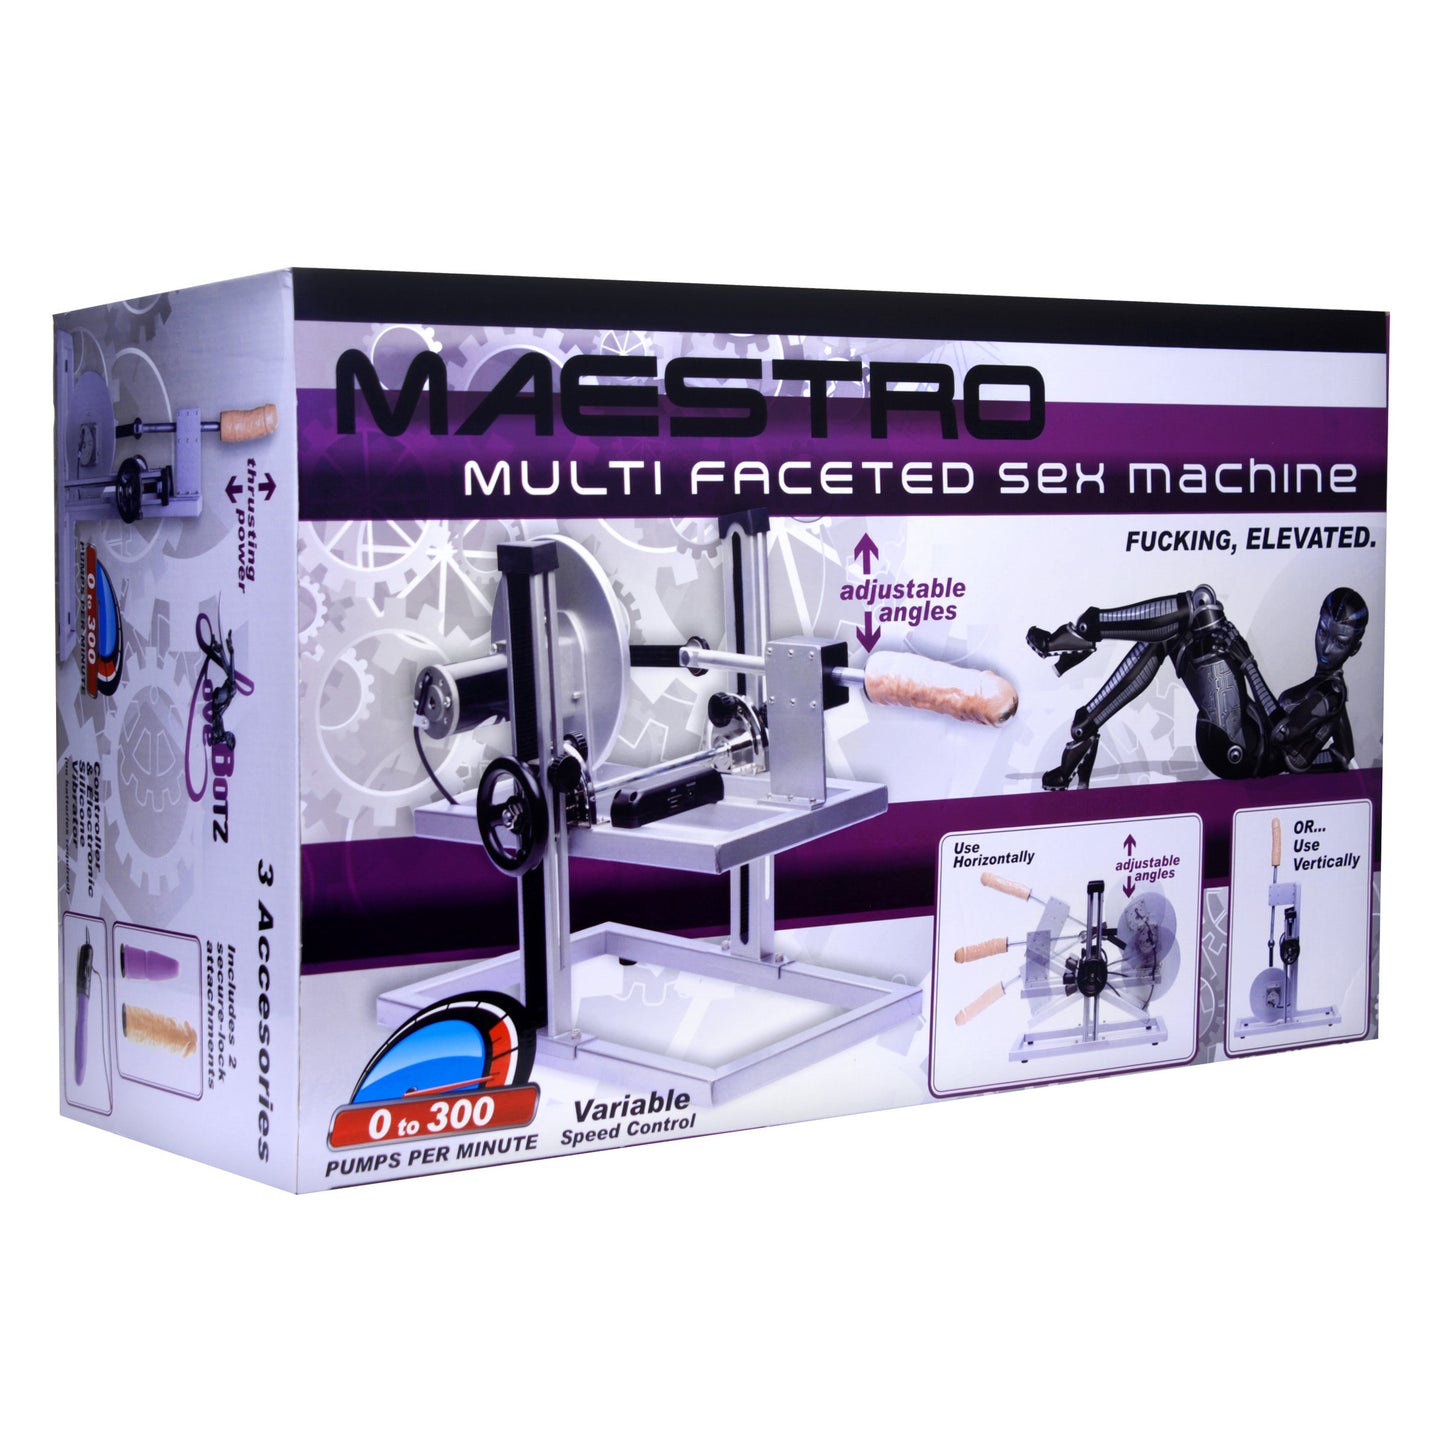 Maestro Multi-Faceted Sex Machine with Universal Adapter - UABDSM